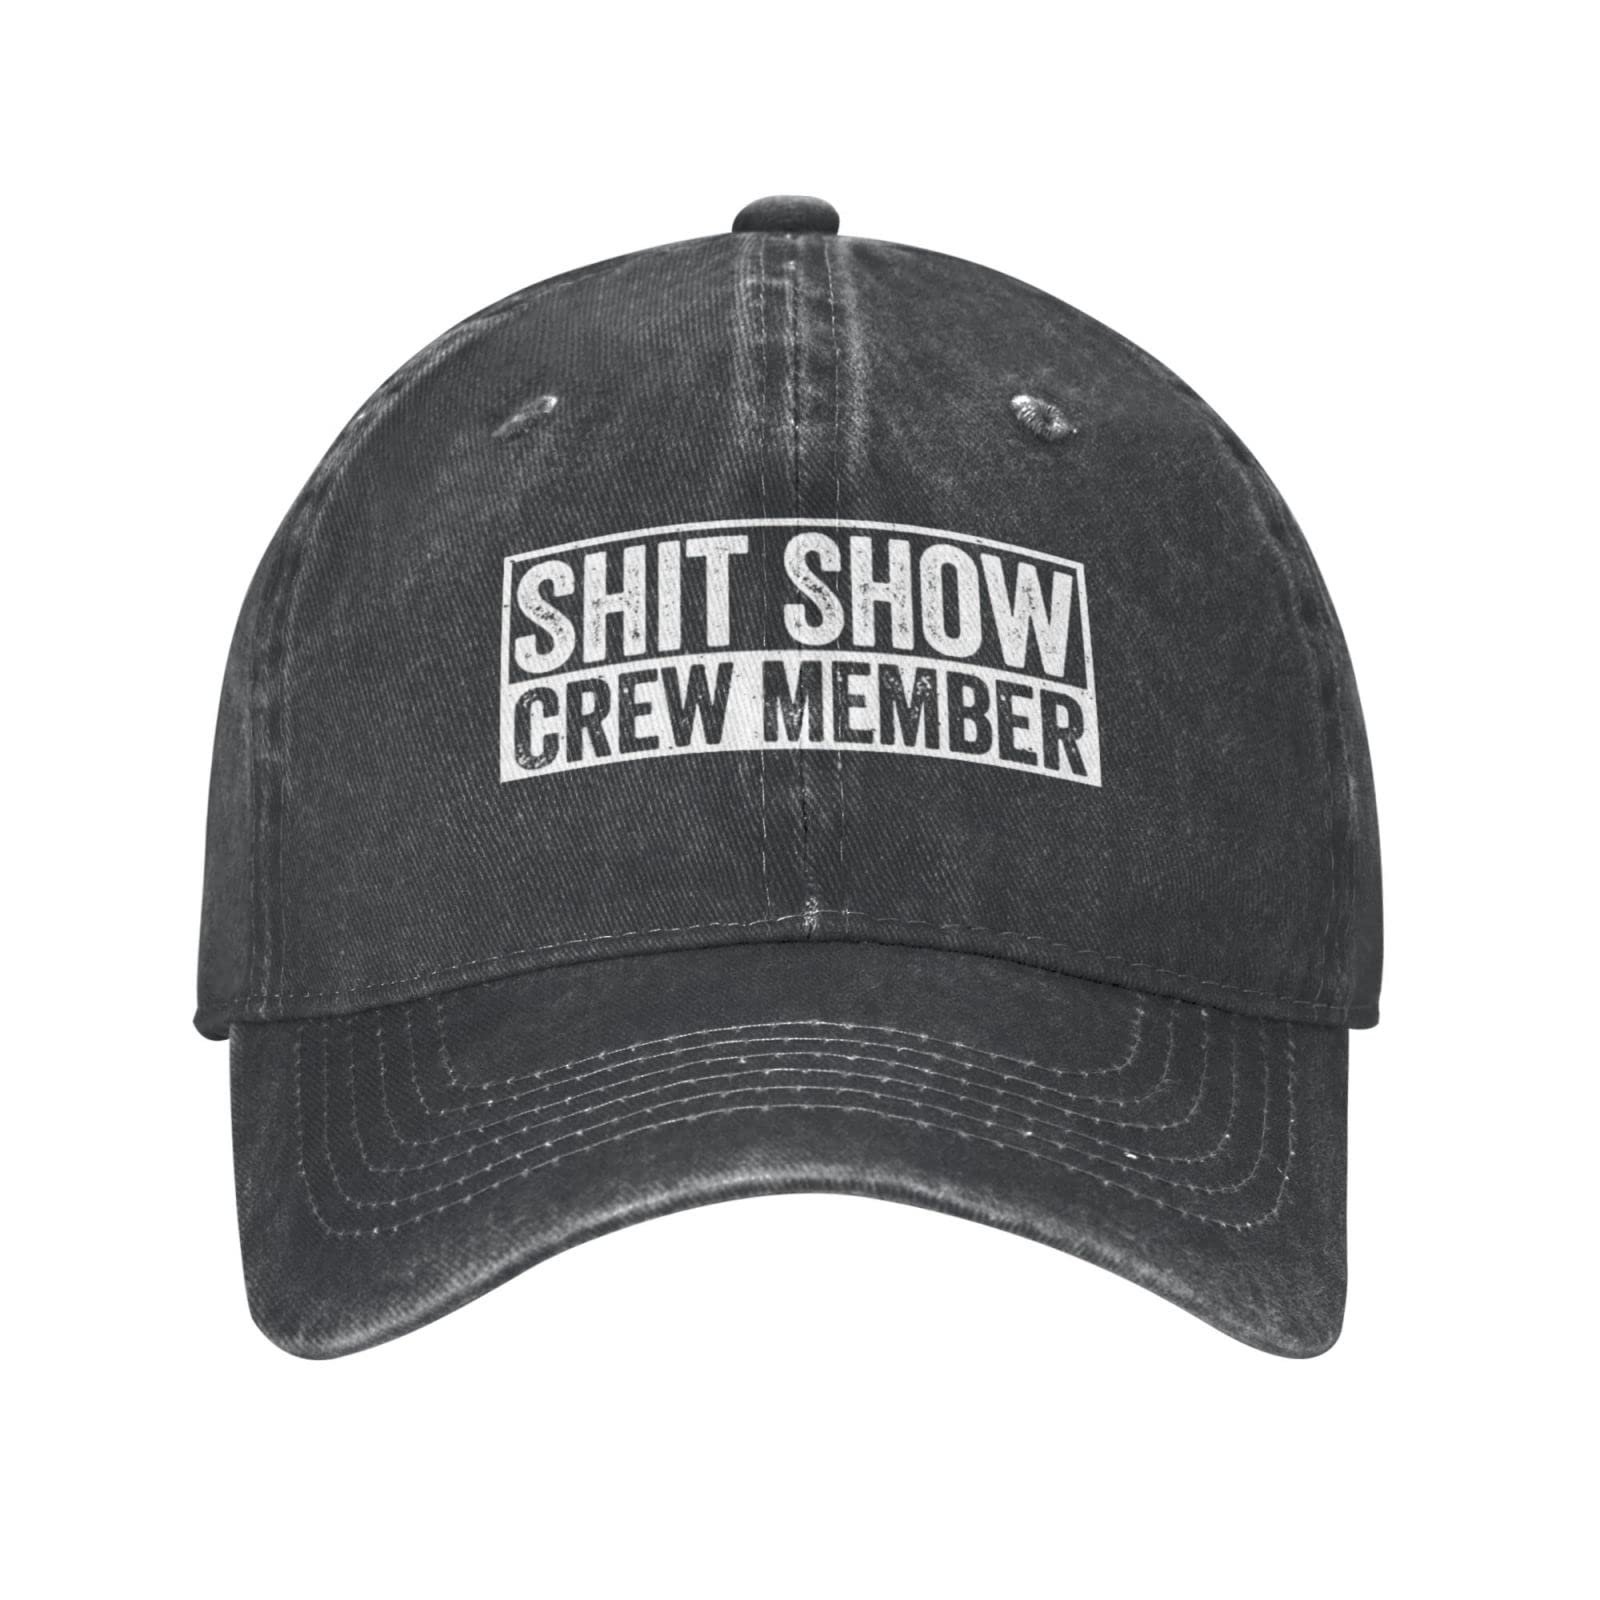 Mens Ball Caps Shit Show Crew Member Vintage Hats for Women Fashion Hats Quick Dry Shit Show Athletic Hats Black